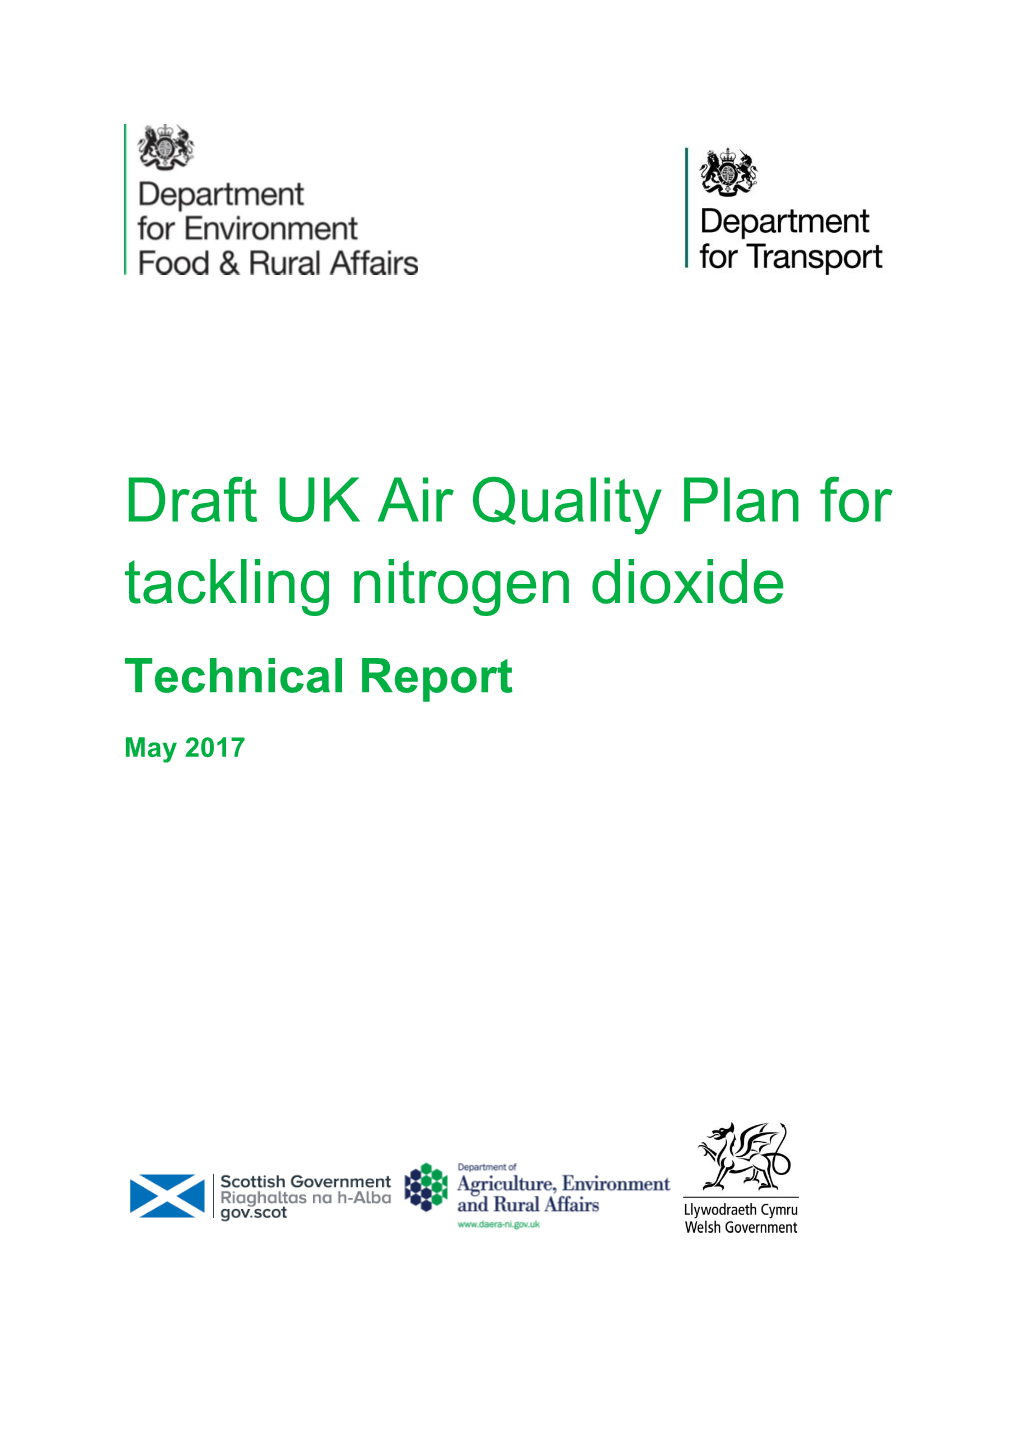 Draft UK Air Quality Plan for Tackling Nitrogen Dioxide Technical Report